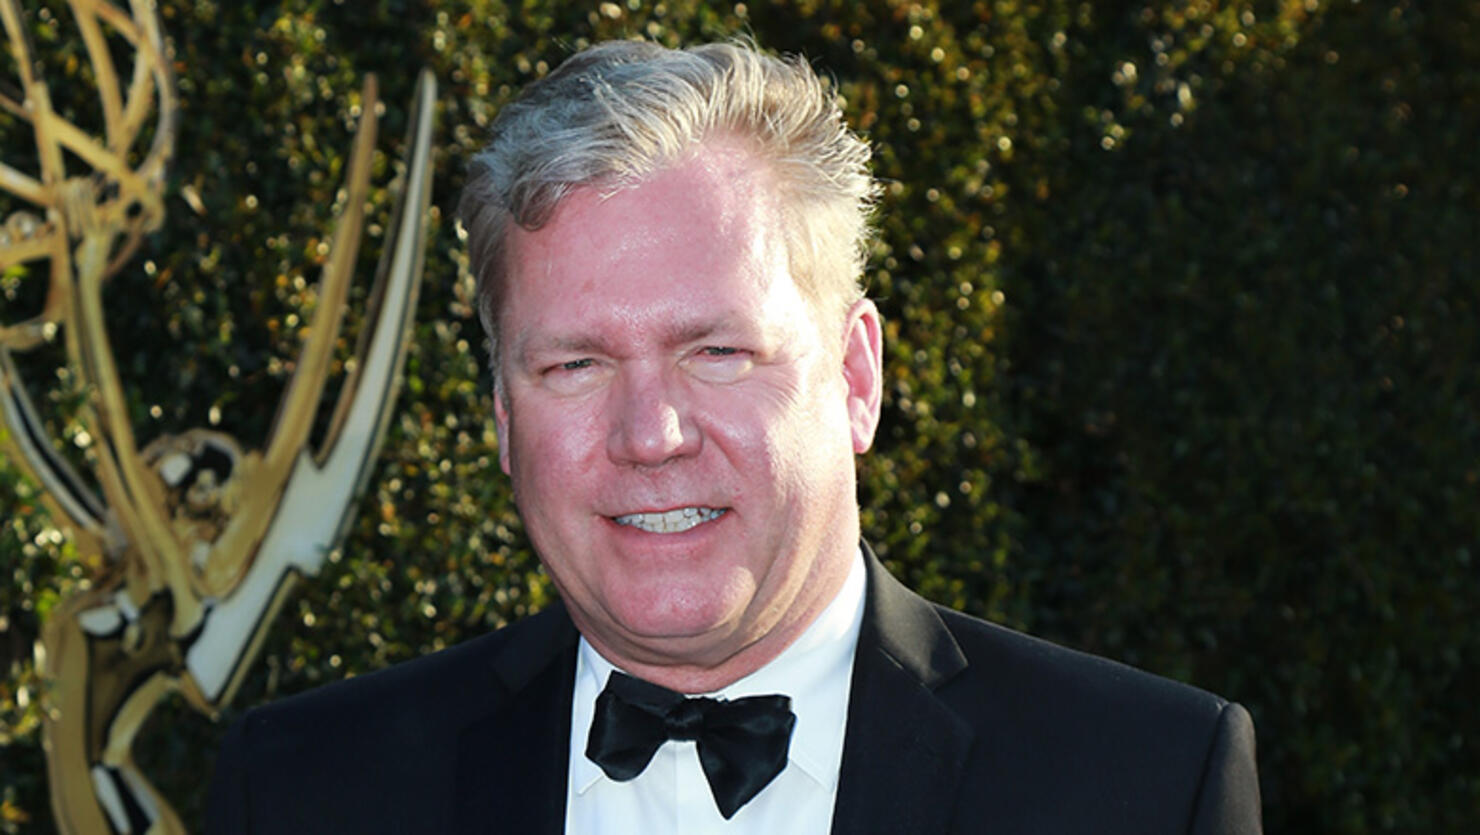 Chris Hansen attends the 45th Annual Daytime Creative Arts Emmy Awards